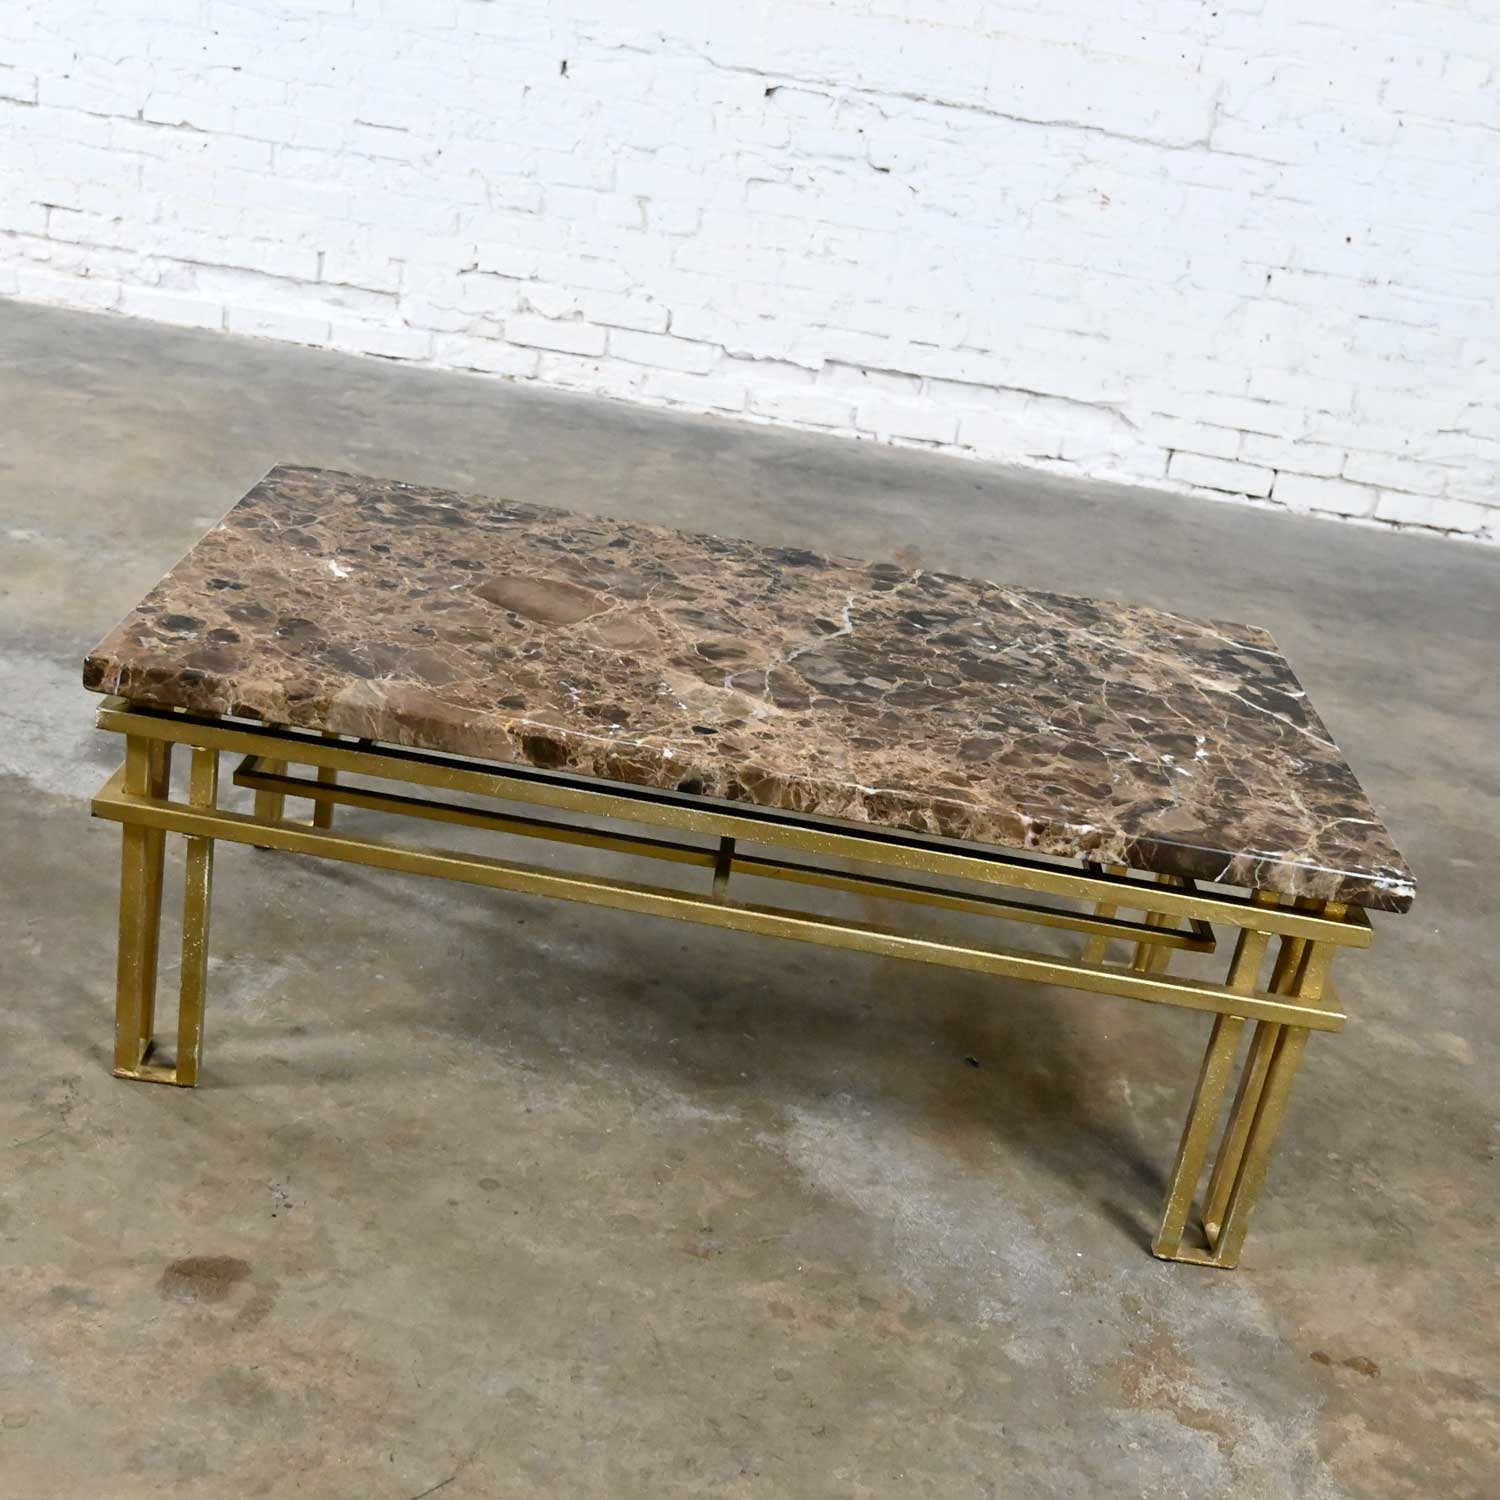 Art Deco Style Gold Painted Steel Tube Rectangle Coffee Table Glass or Brown Marble Top